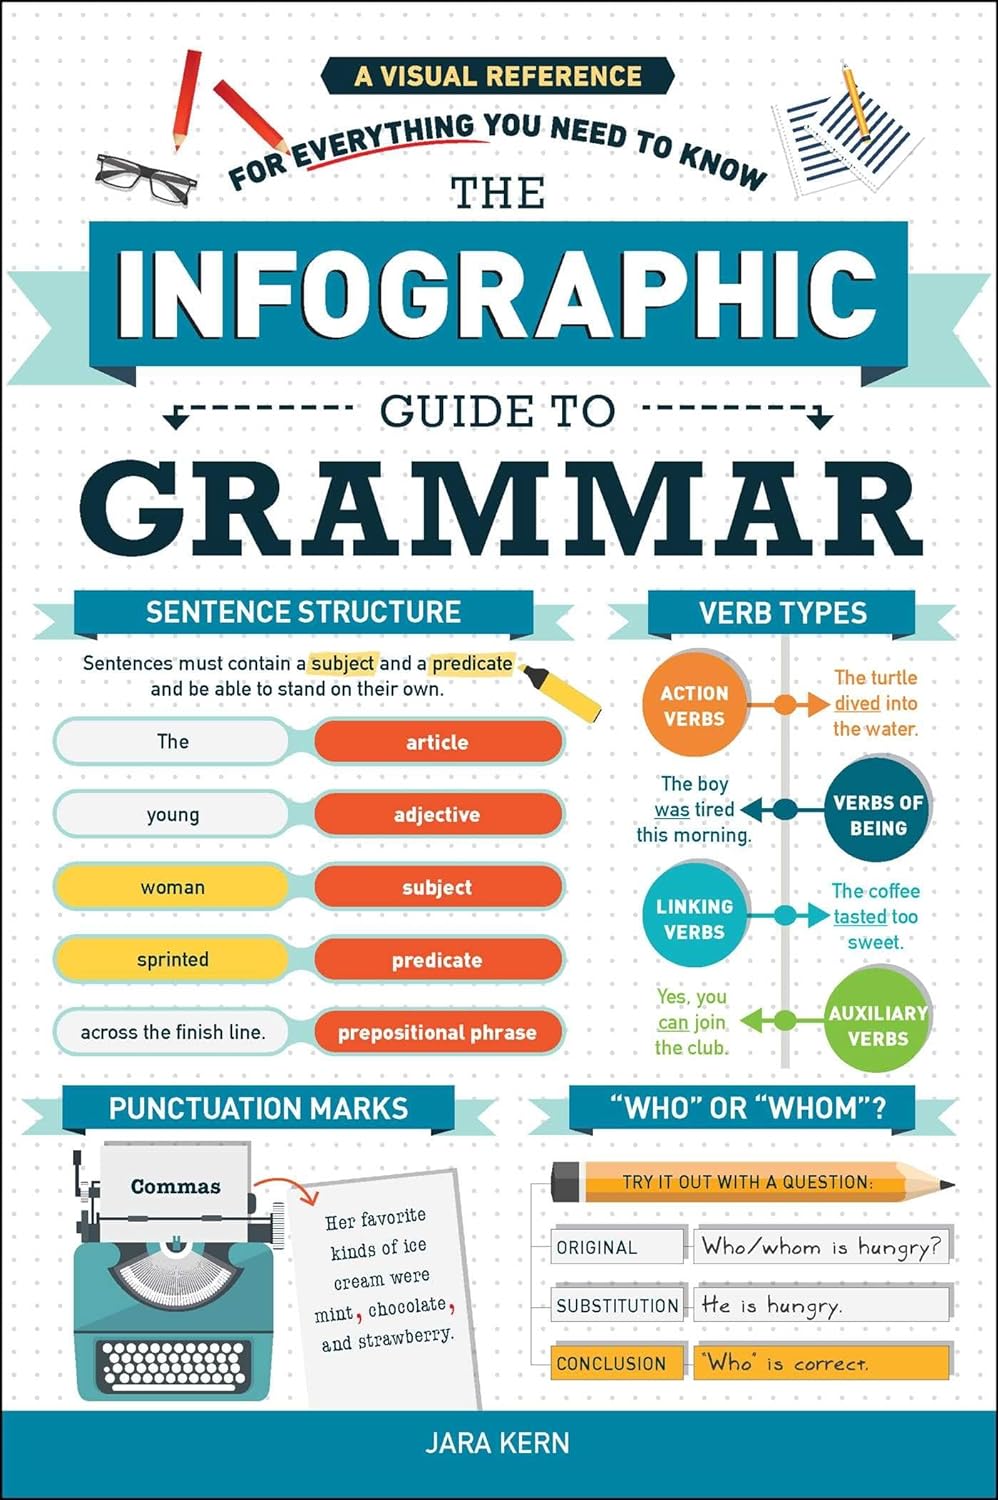 (EBook PDF)The Infographic Guide to Grammar: A Visual Reference for Everything You Need to Know by Jara Kern